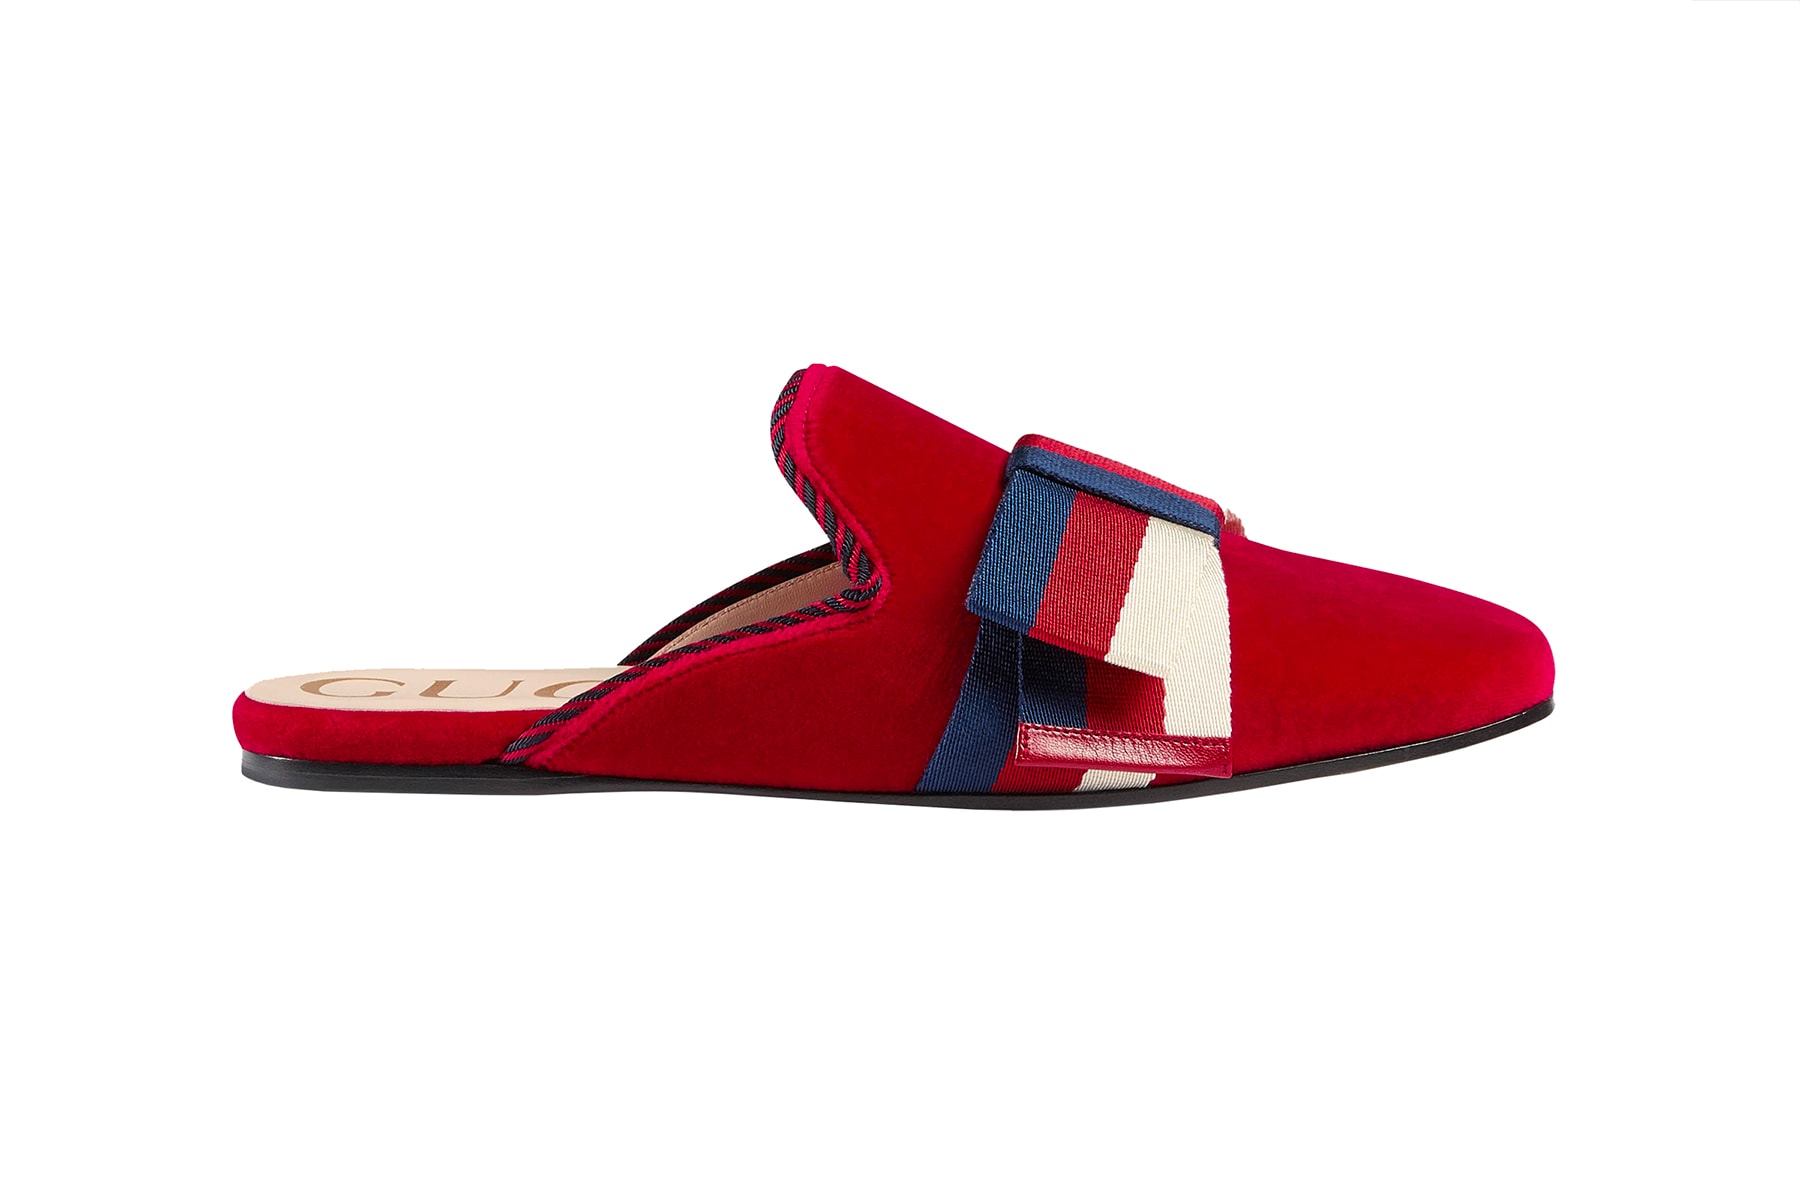 Gucci Velvet Slippers Sylvie Bow Hibiscus Red Blue Slides Mules Cruise 2018 Alessandro Michele